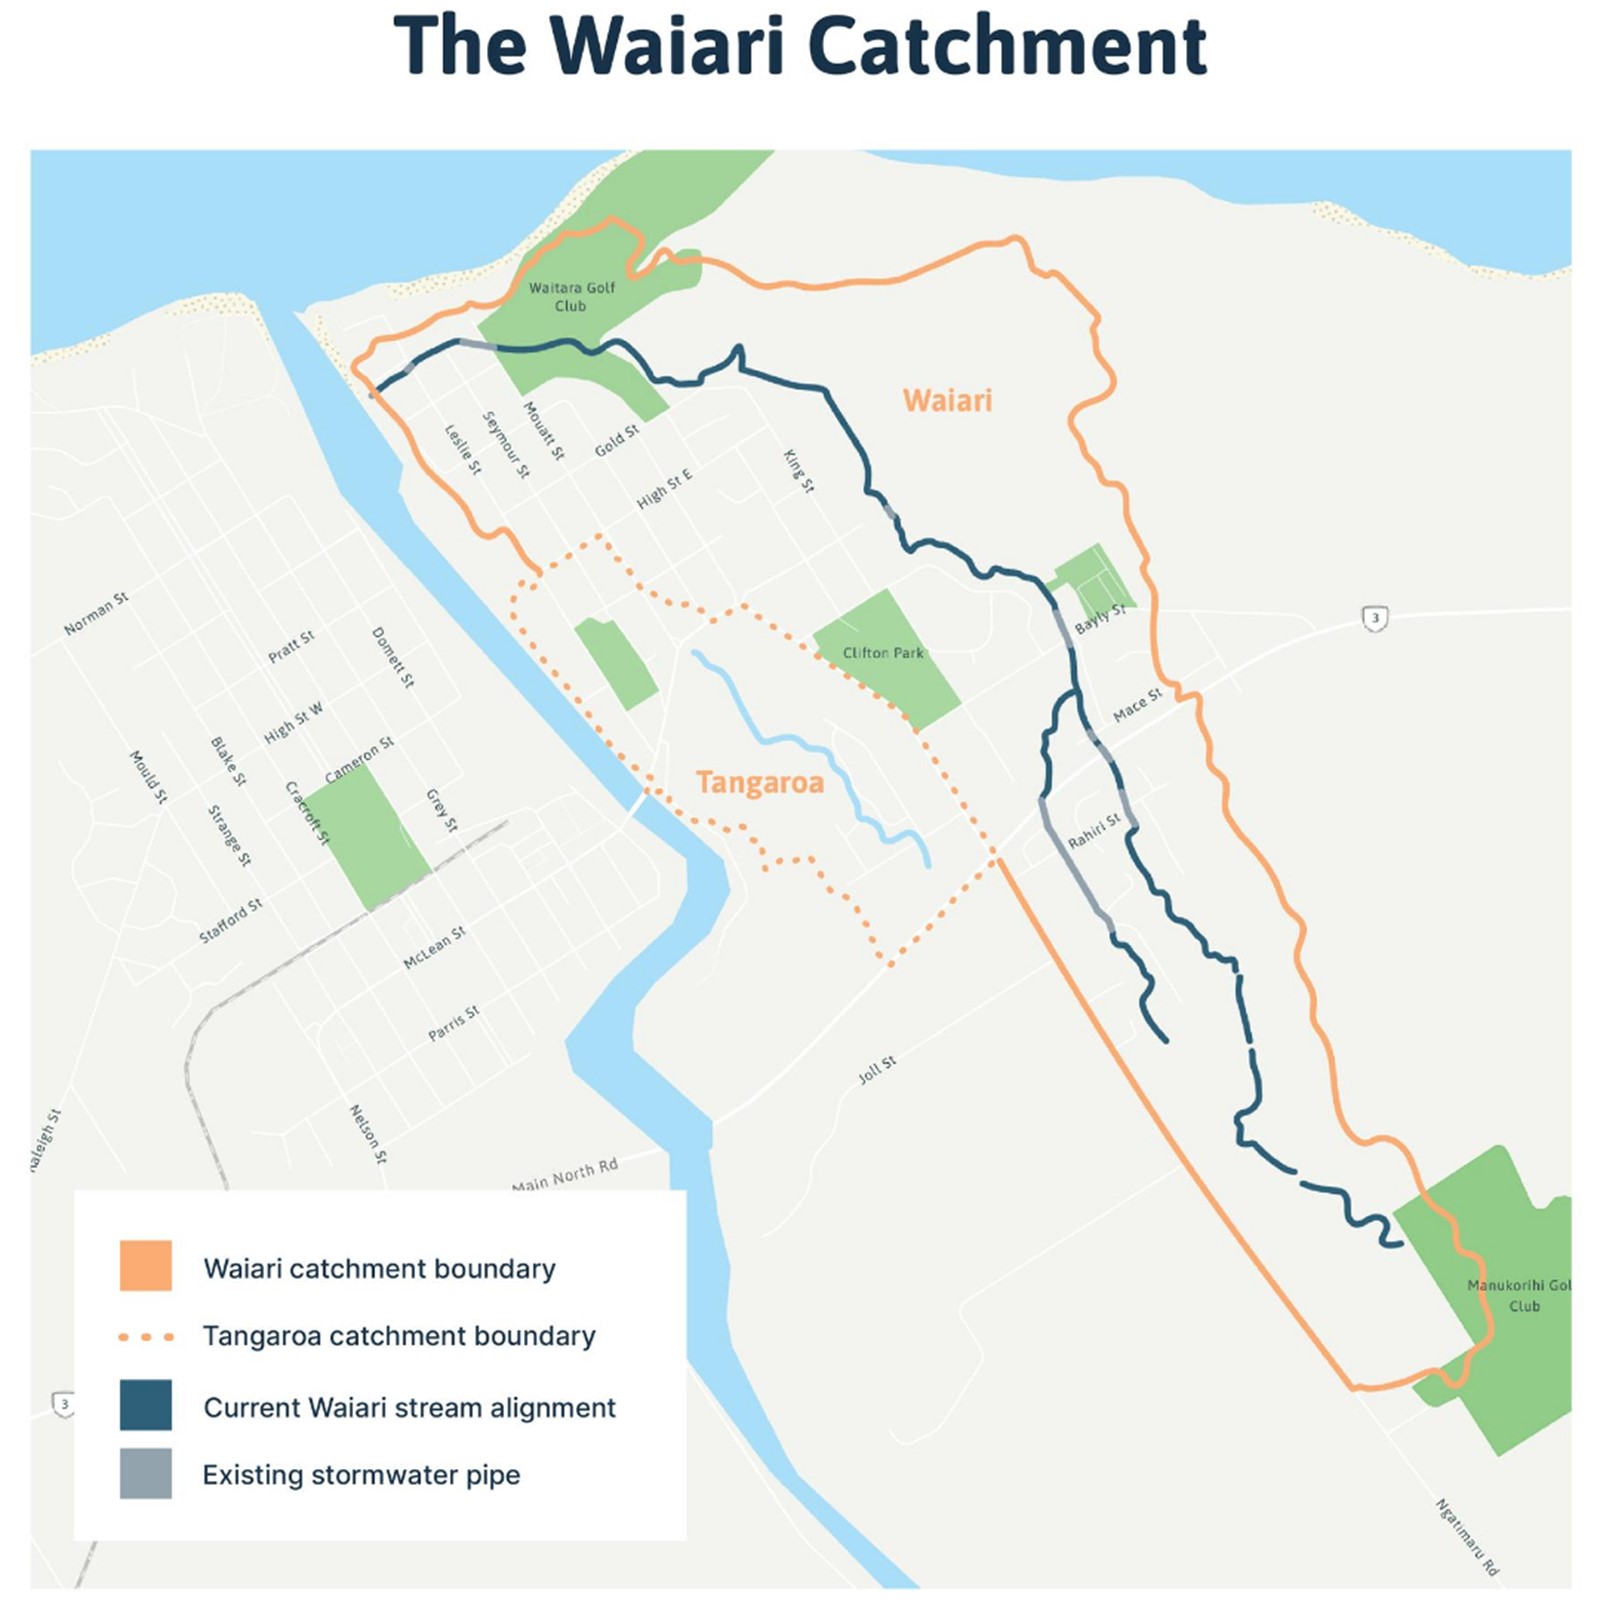 The Waiari catchment and the current stream alignment